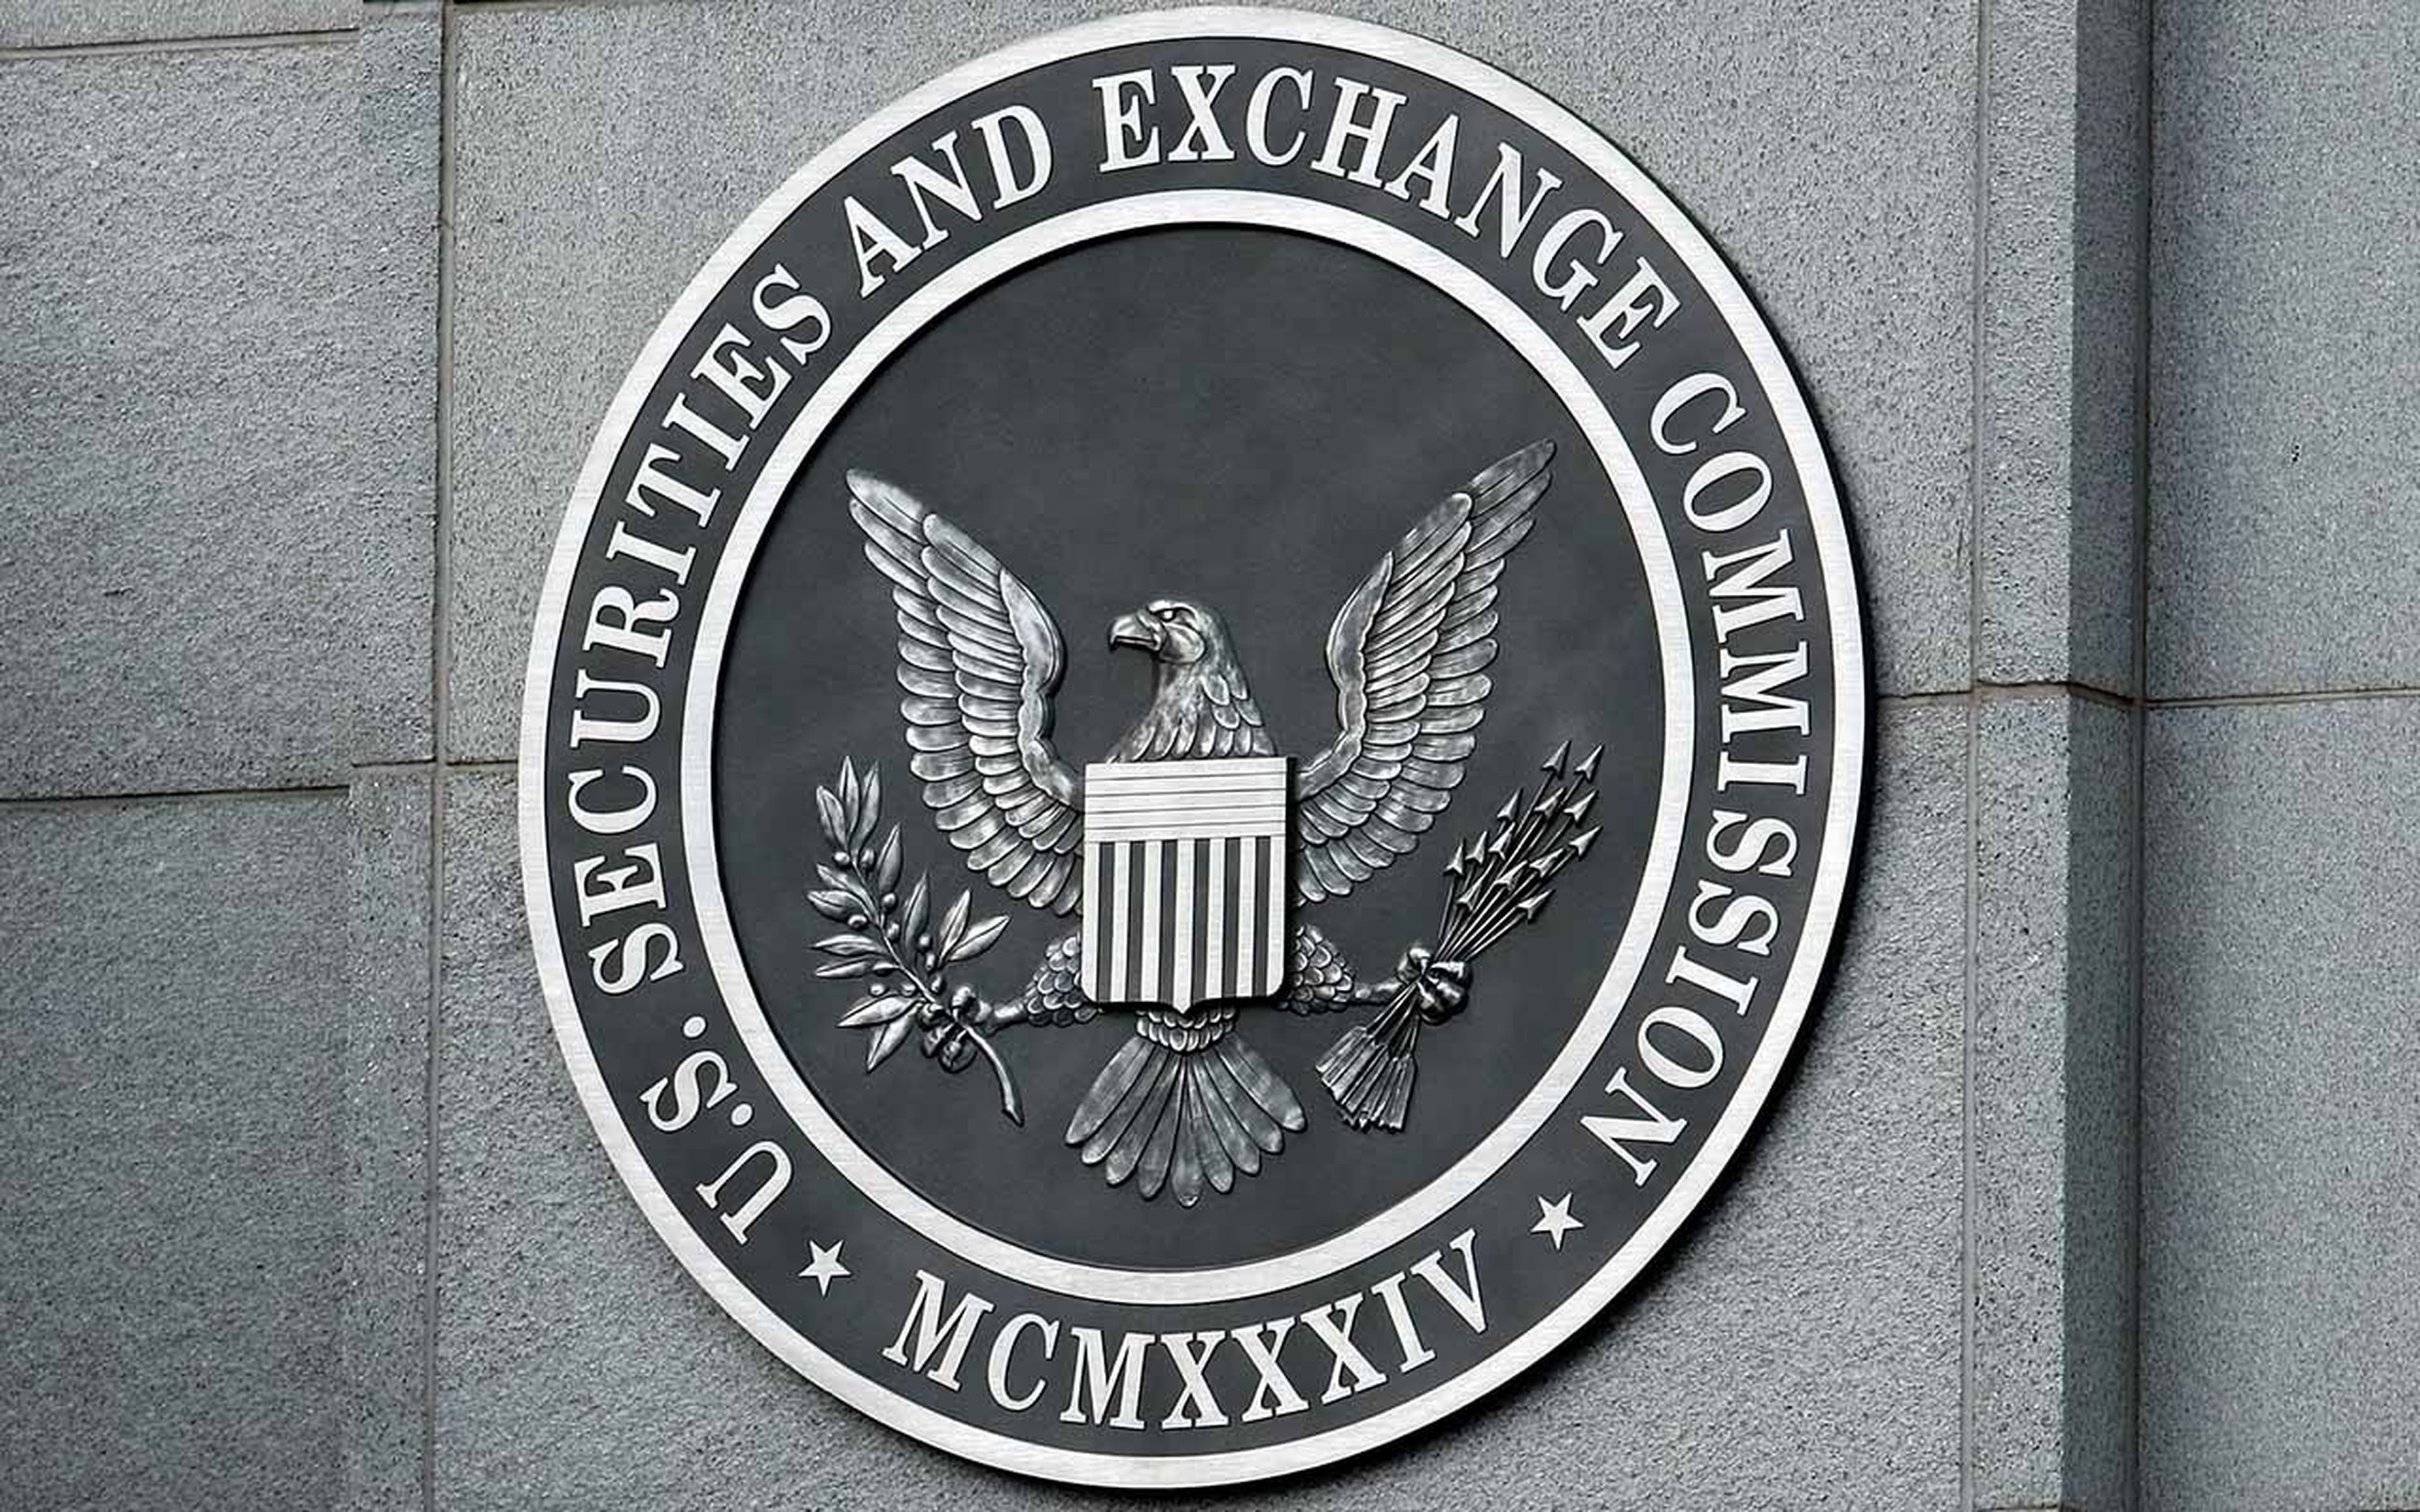 The U.S. Securities and Exchange Commission seal